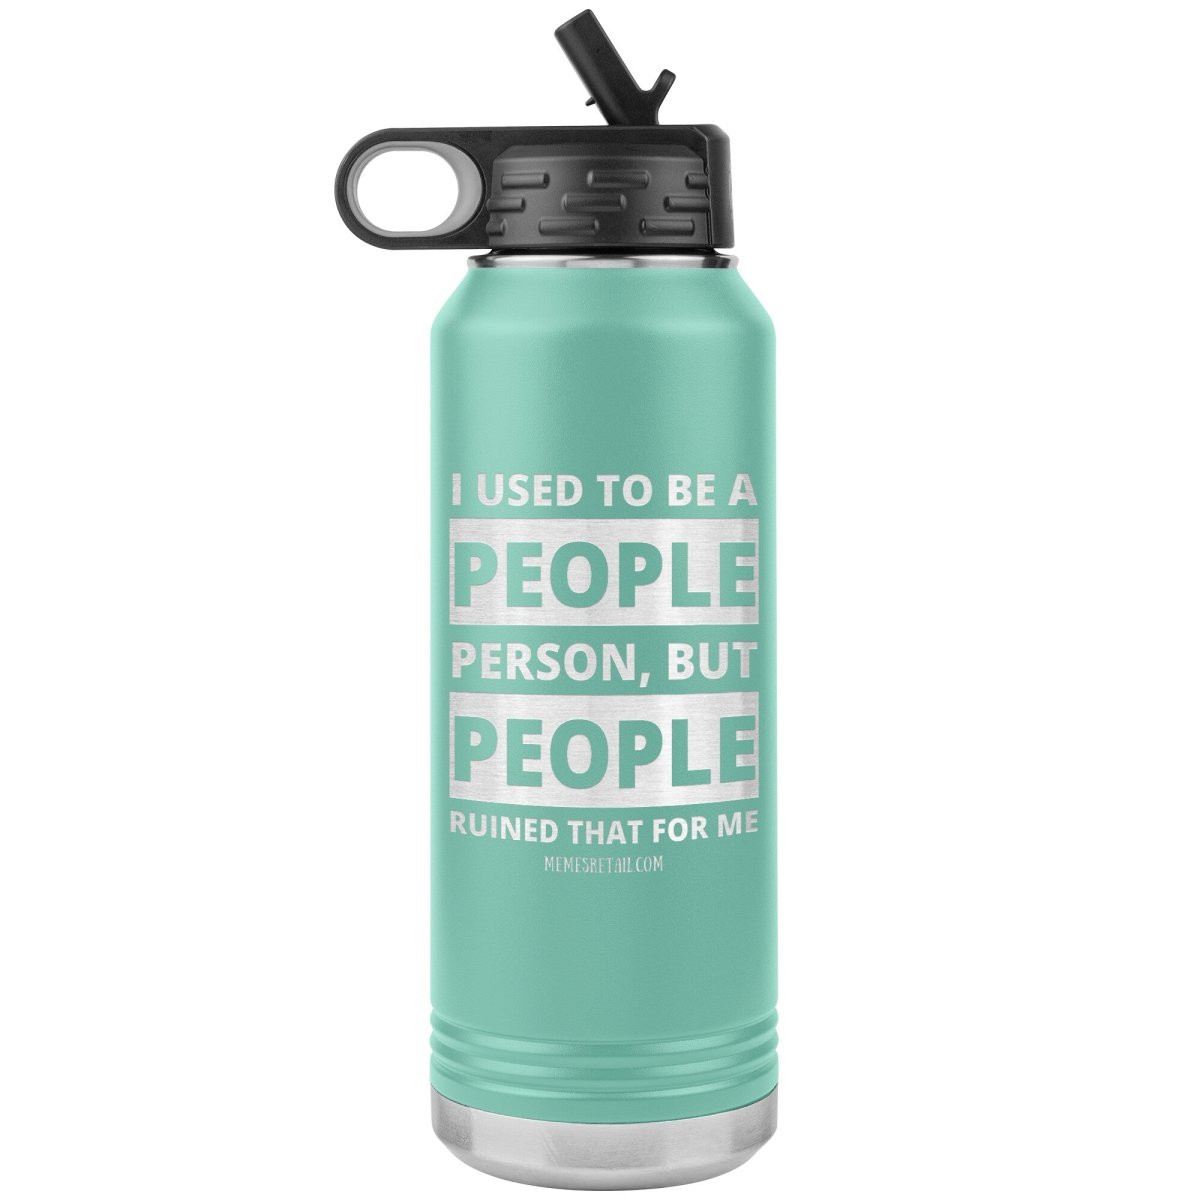 I Used To Be A People Person, But People Ruined That For Me 32 oz Water Tumbler, Teal - MemesRetail.com